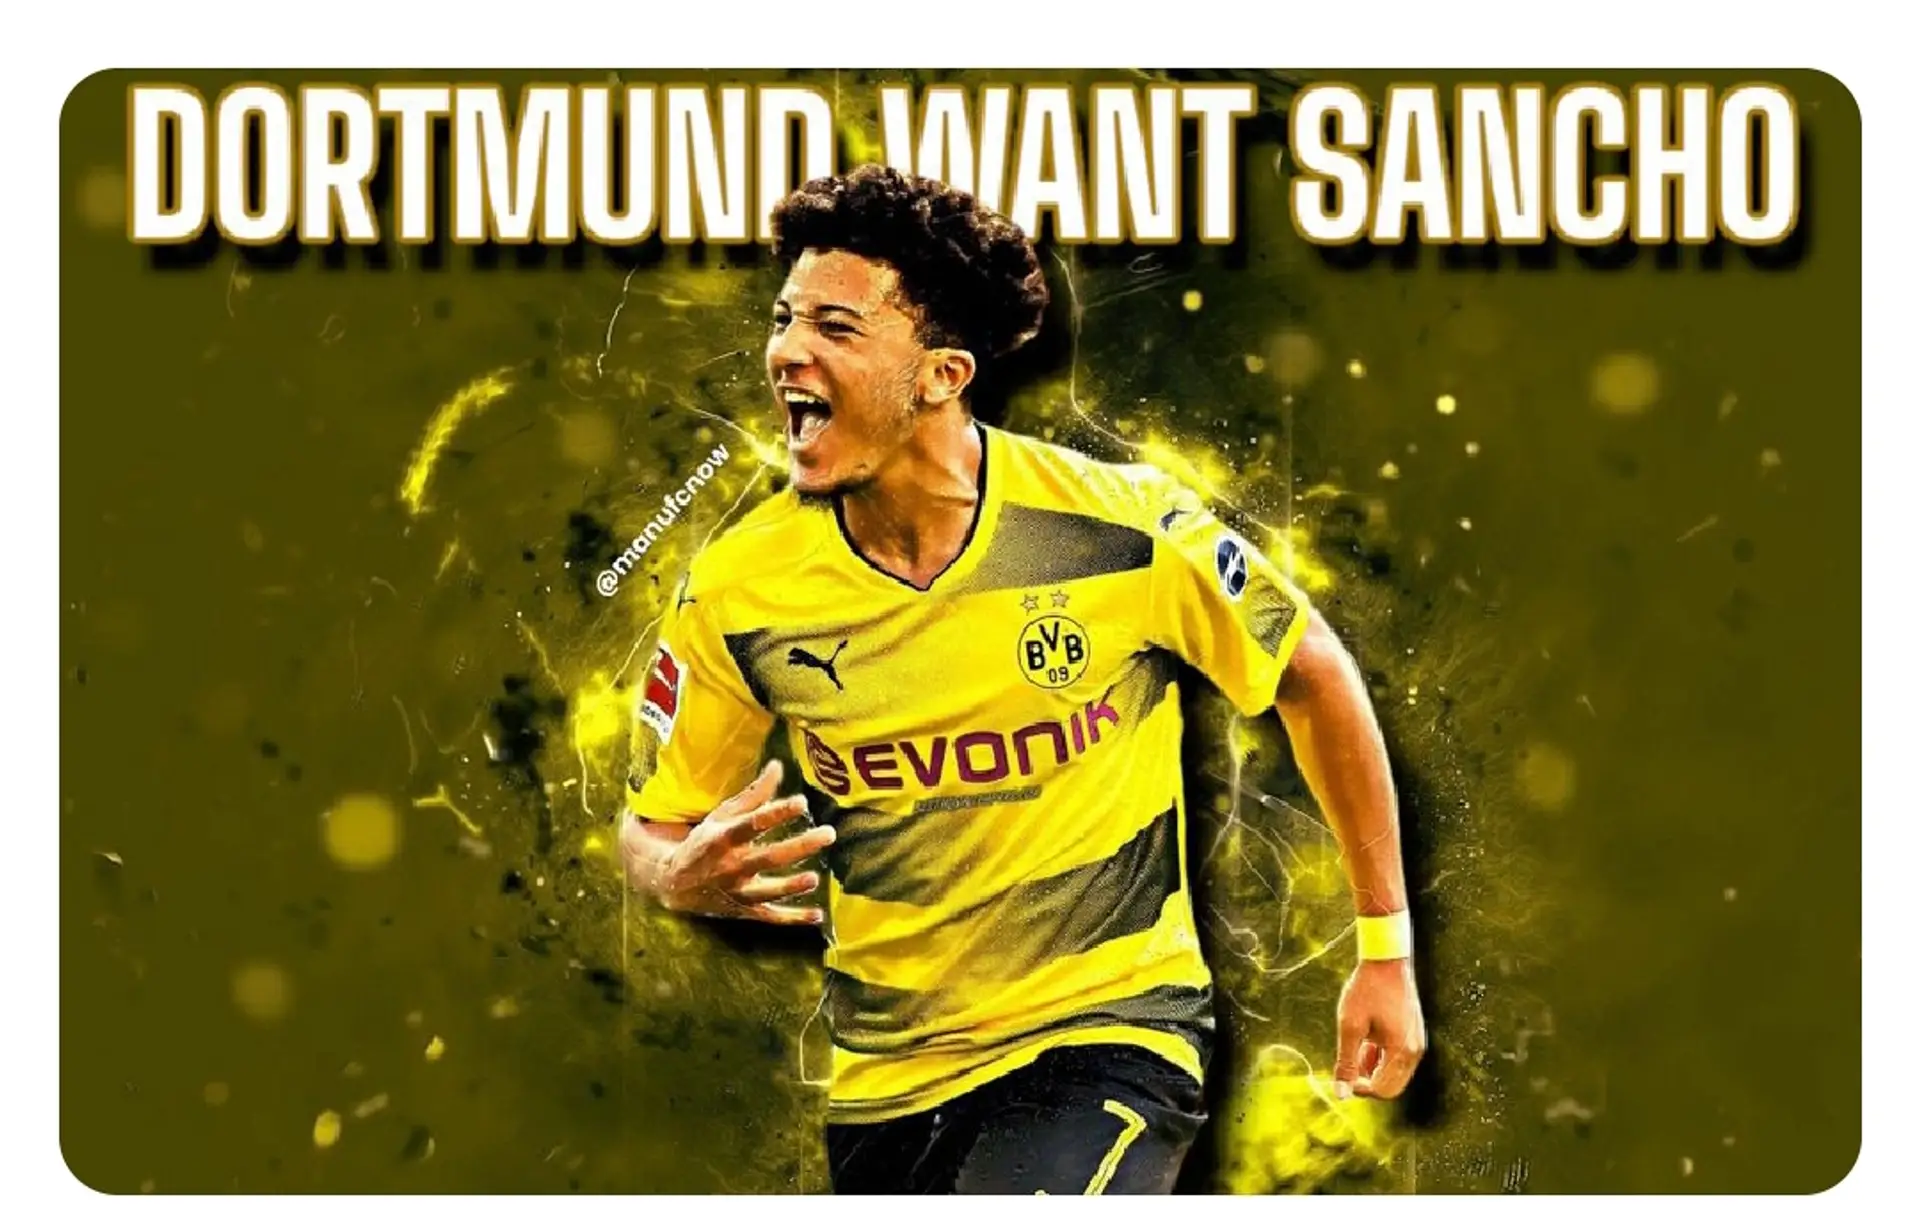 Man United reportedly want £50M for Sancho